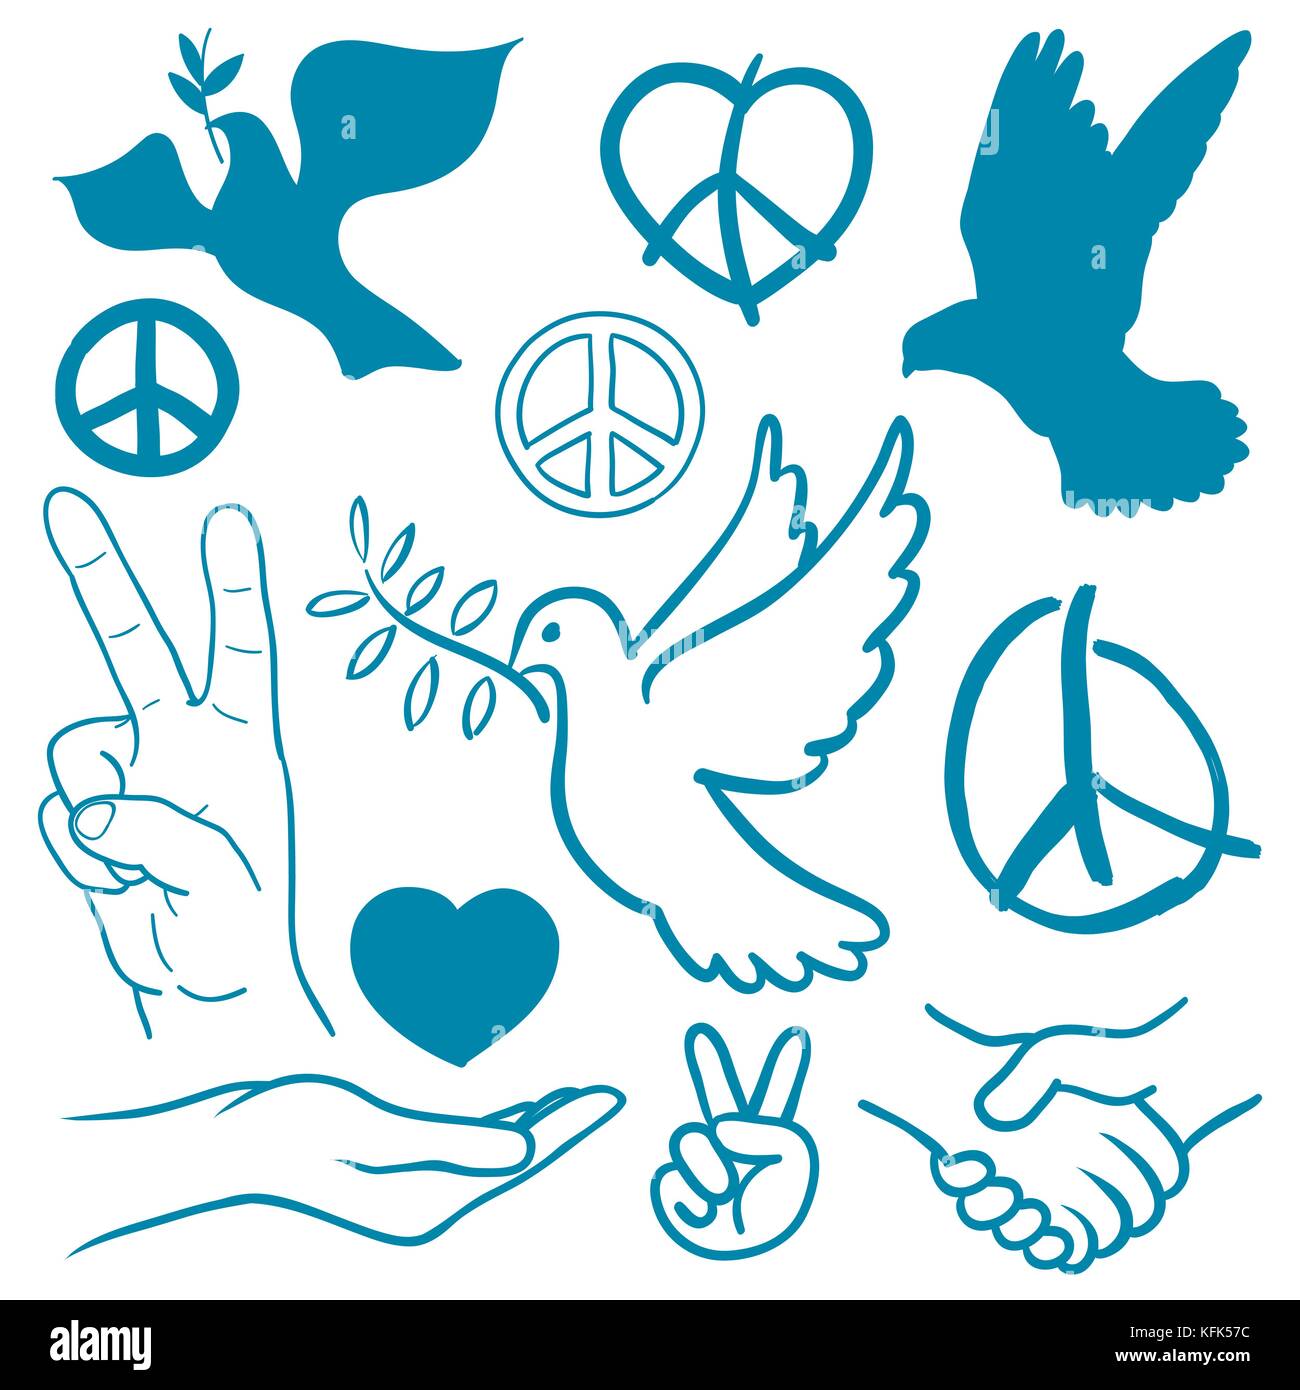 Collection of peace and love themed icons with white dove flying carrying olive branch, v-sign hand gesture, handshake of friendship, heart - vector Stock Vector